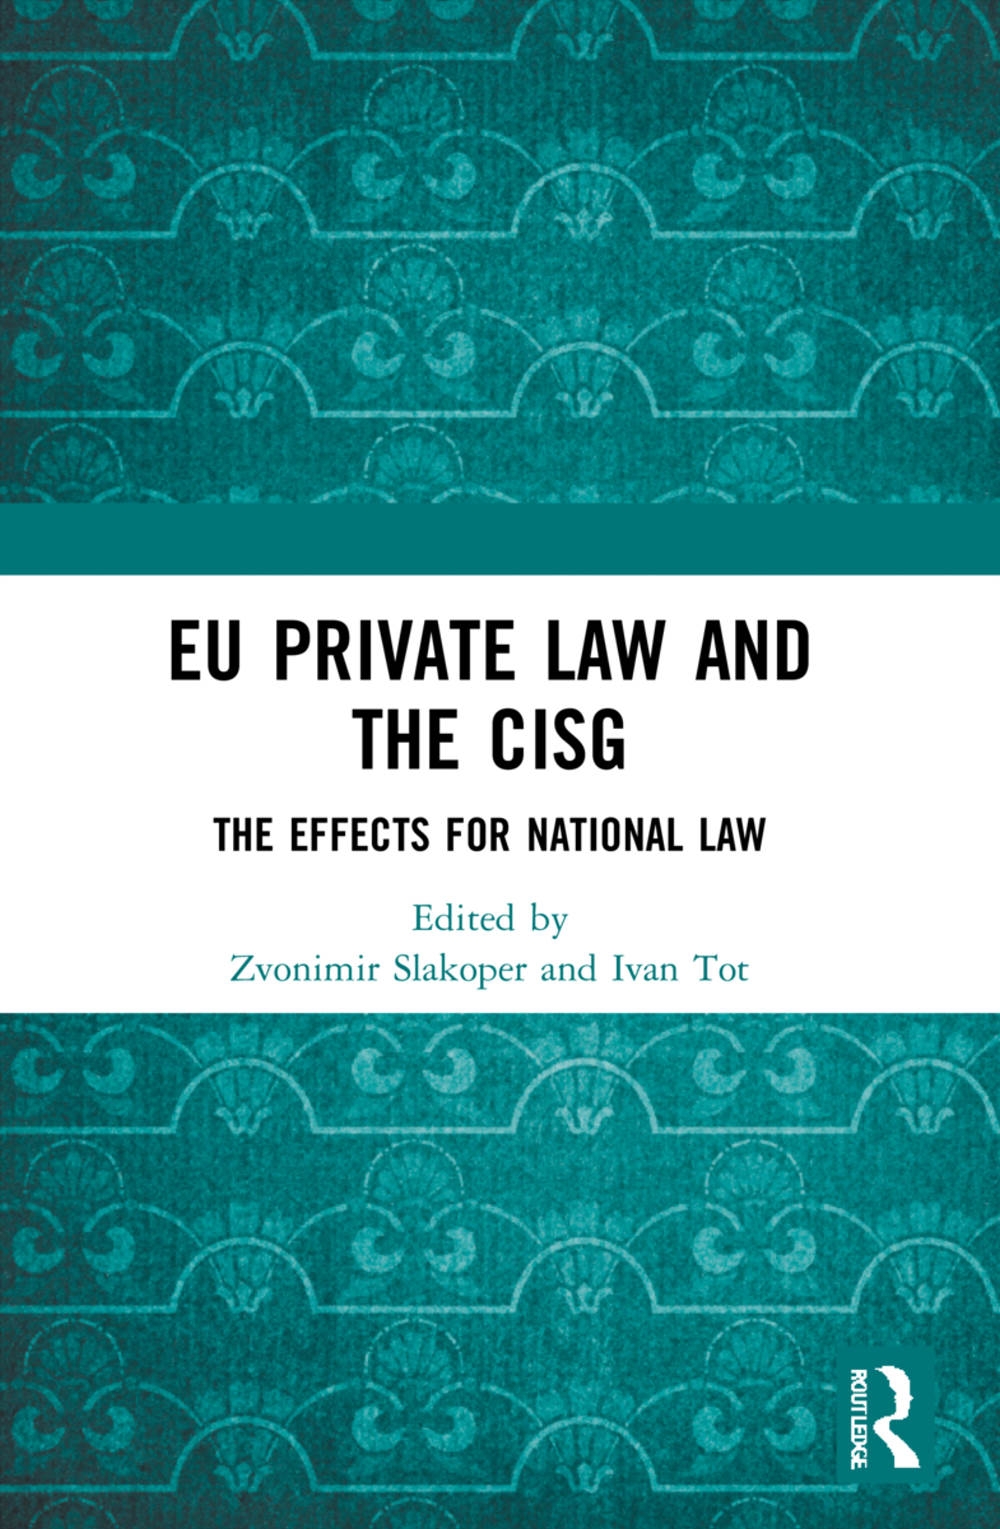 Eu Private Law and the Cisg: The Effects for National Law